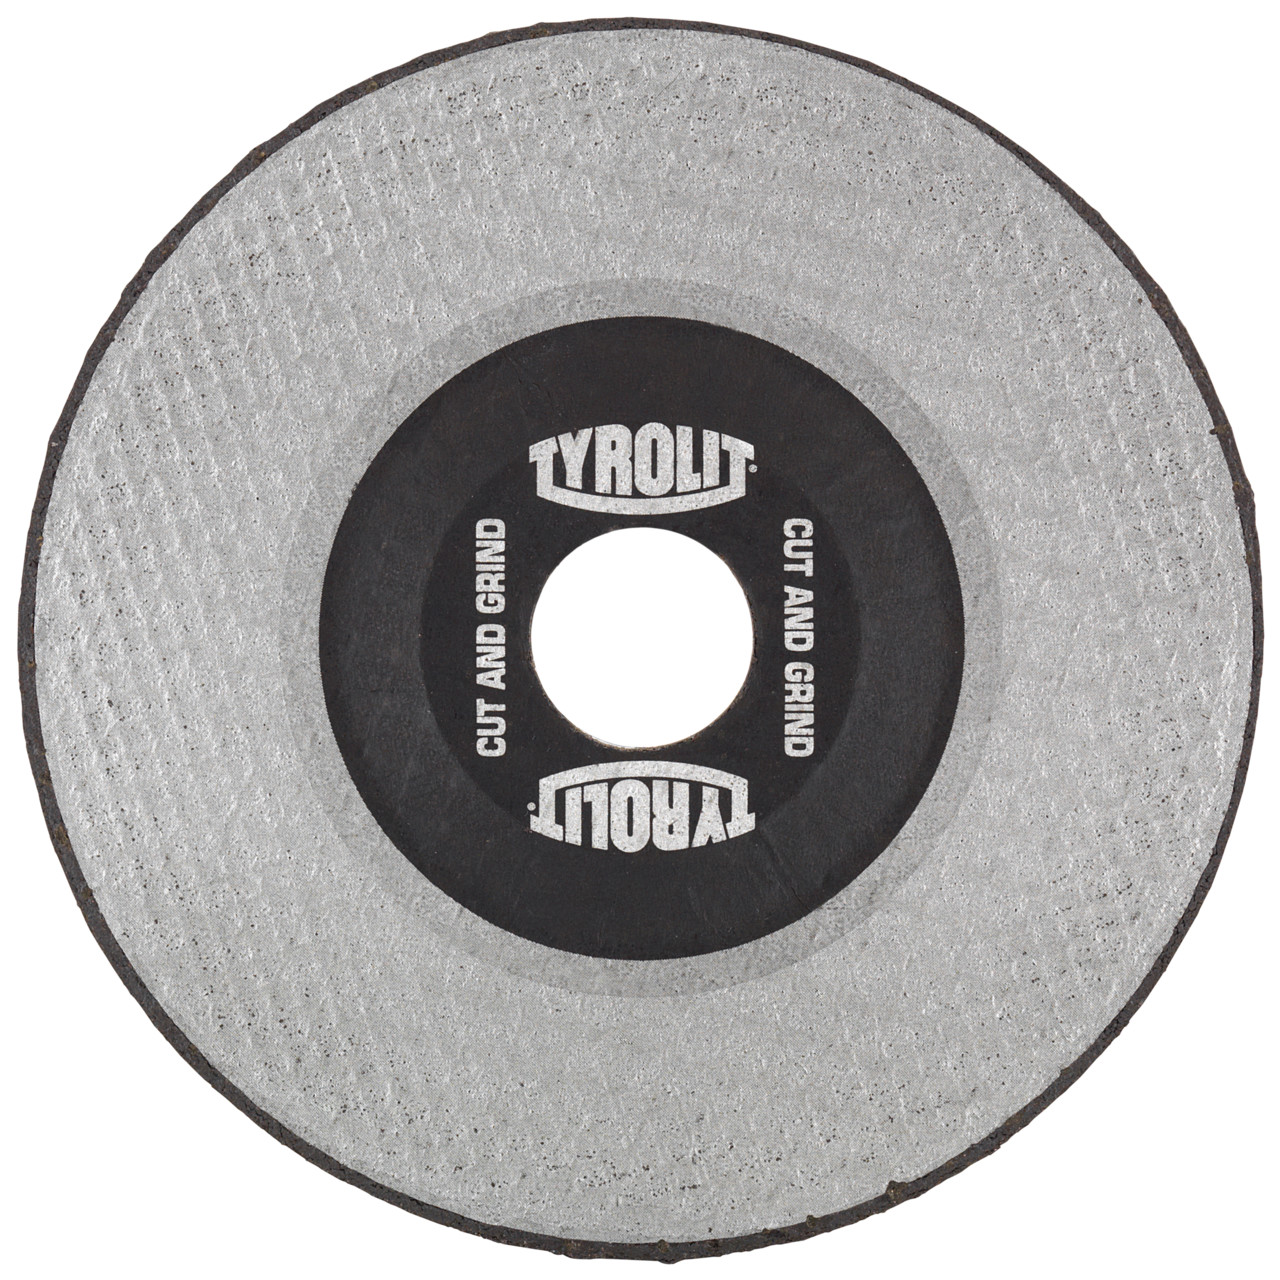 Tyrolit Cut-off wheel CUT AND GRIND DxUxH 125x2x22.23 With DEEP Cut Protection for steel and stainless steel, shape: 27 - offset version, Art. 34042757